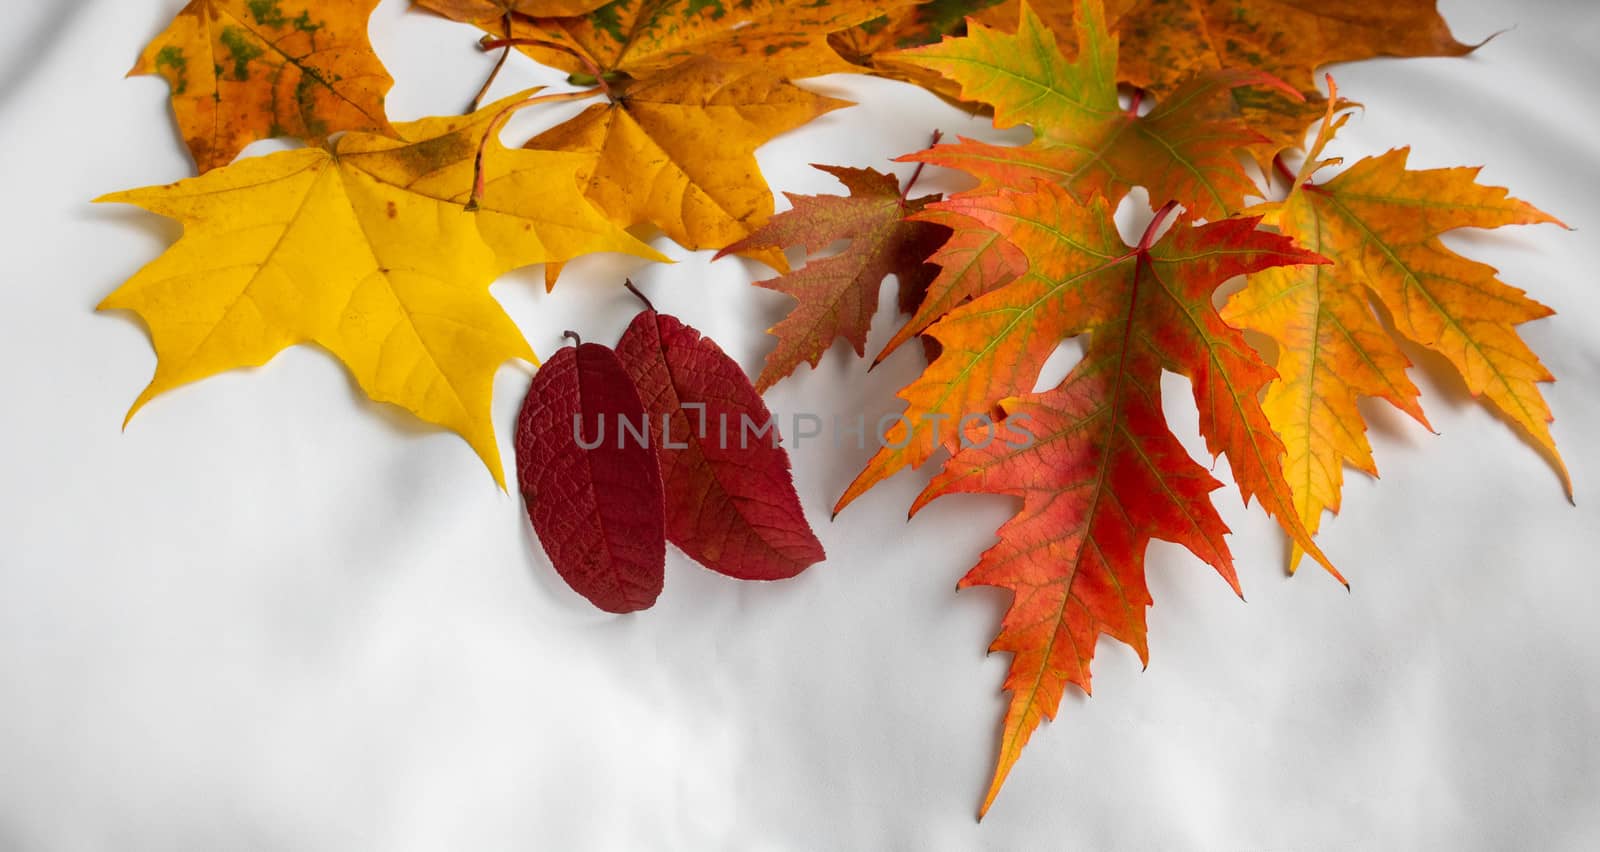 Autumn maple leaves hover on a white background.